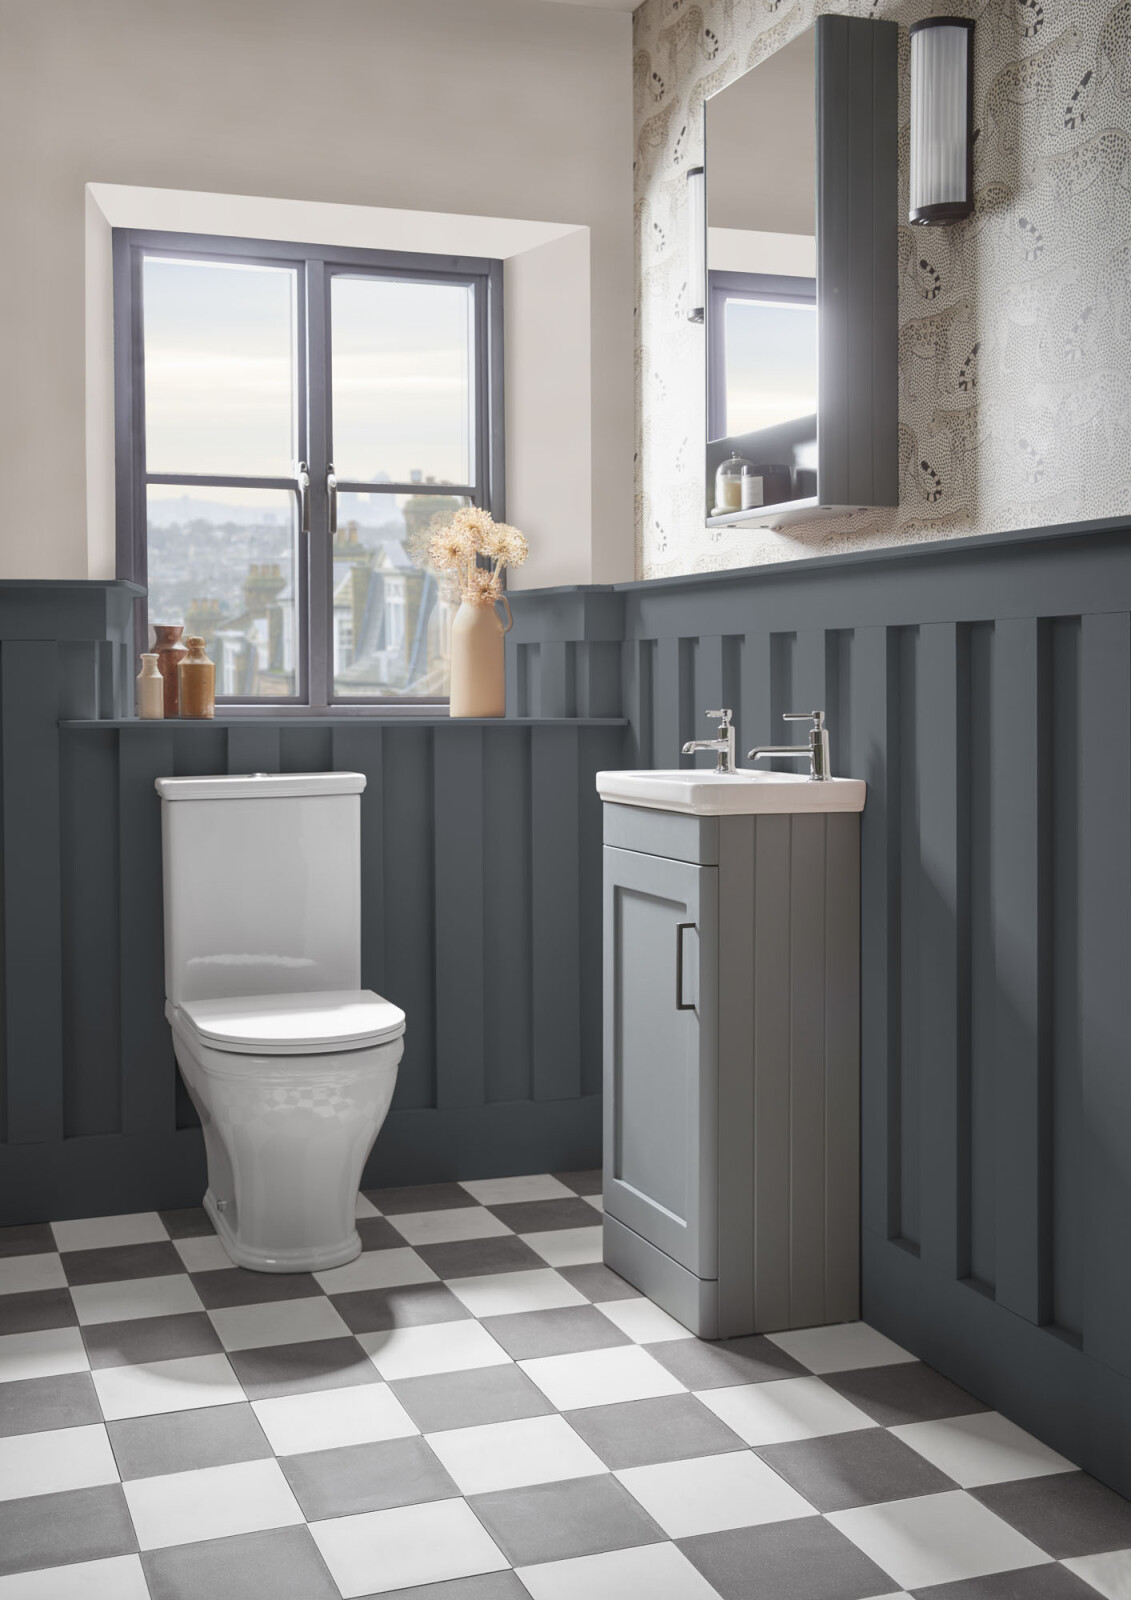 Product Lifestyle image of Roper Rhodes Marston Cloakroom Spruce with Lucia Black Handle